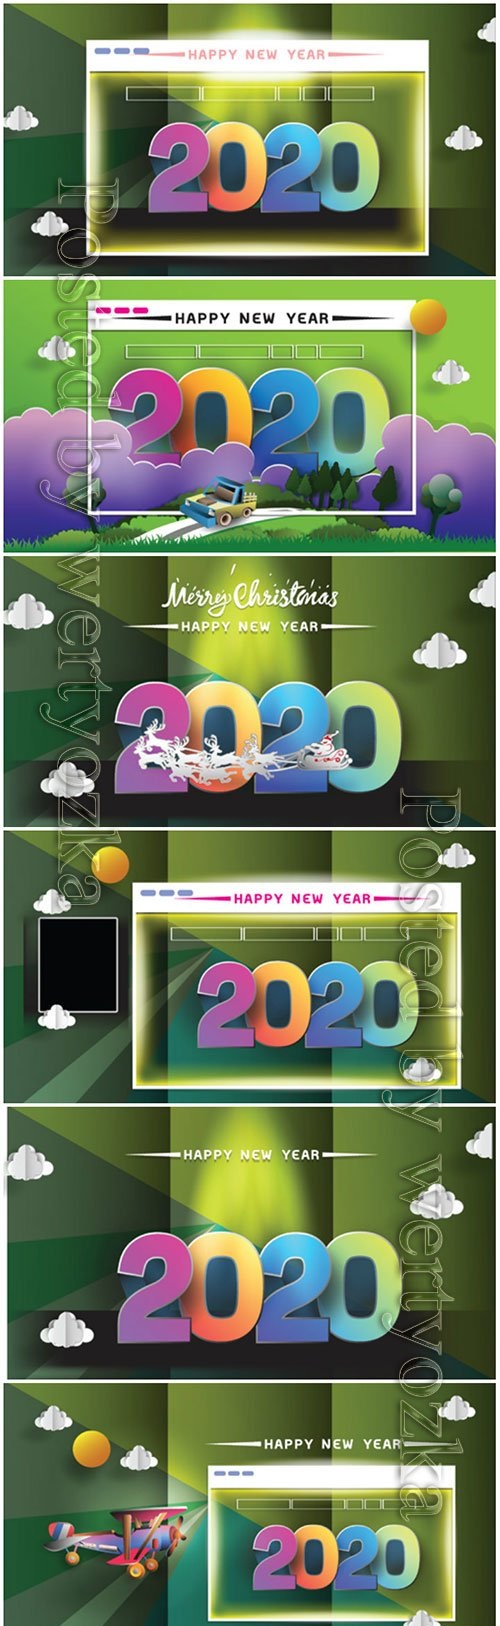 2020 New Year holidays cards, Christmas greetings invitations